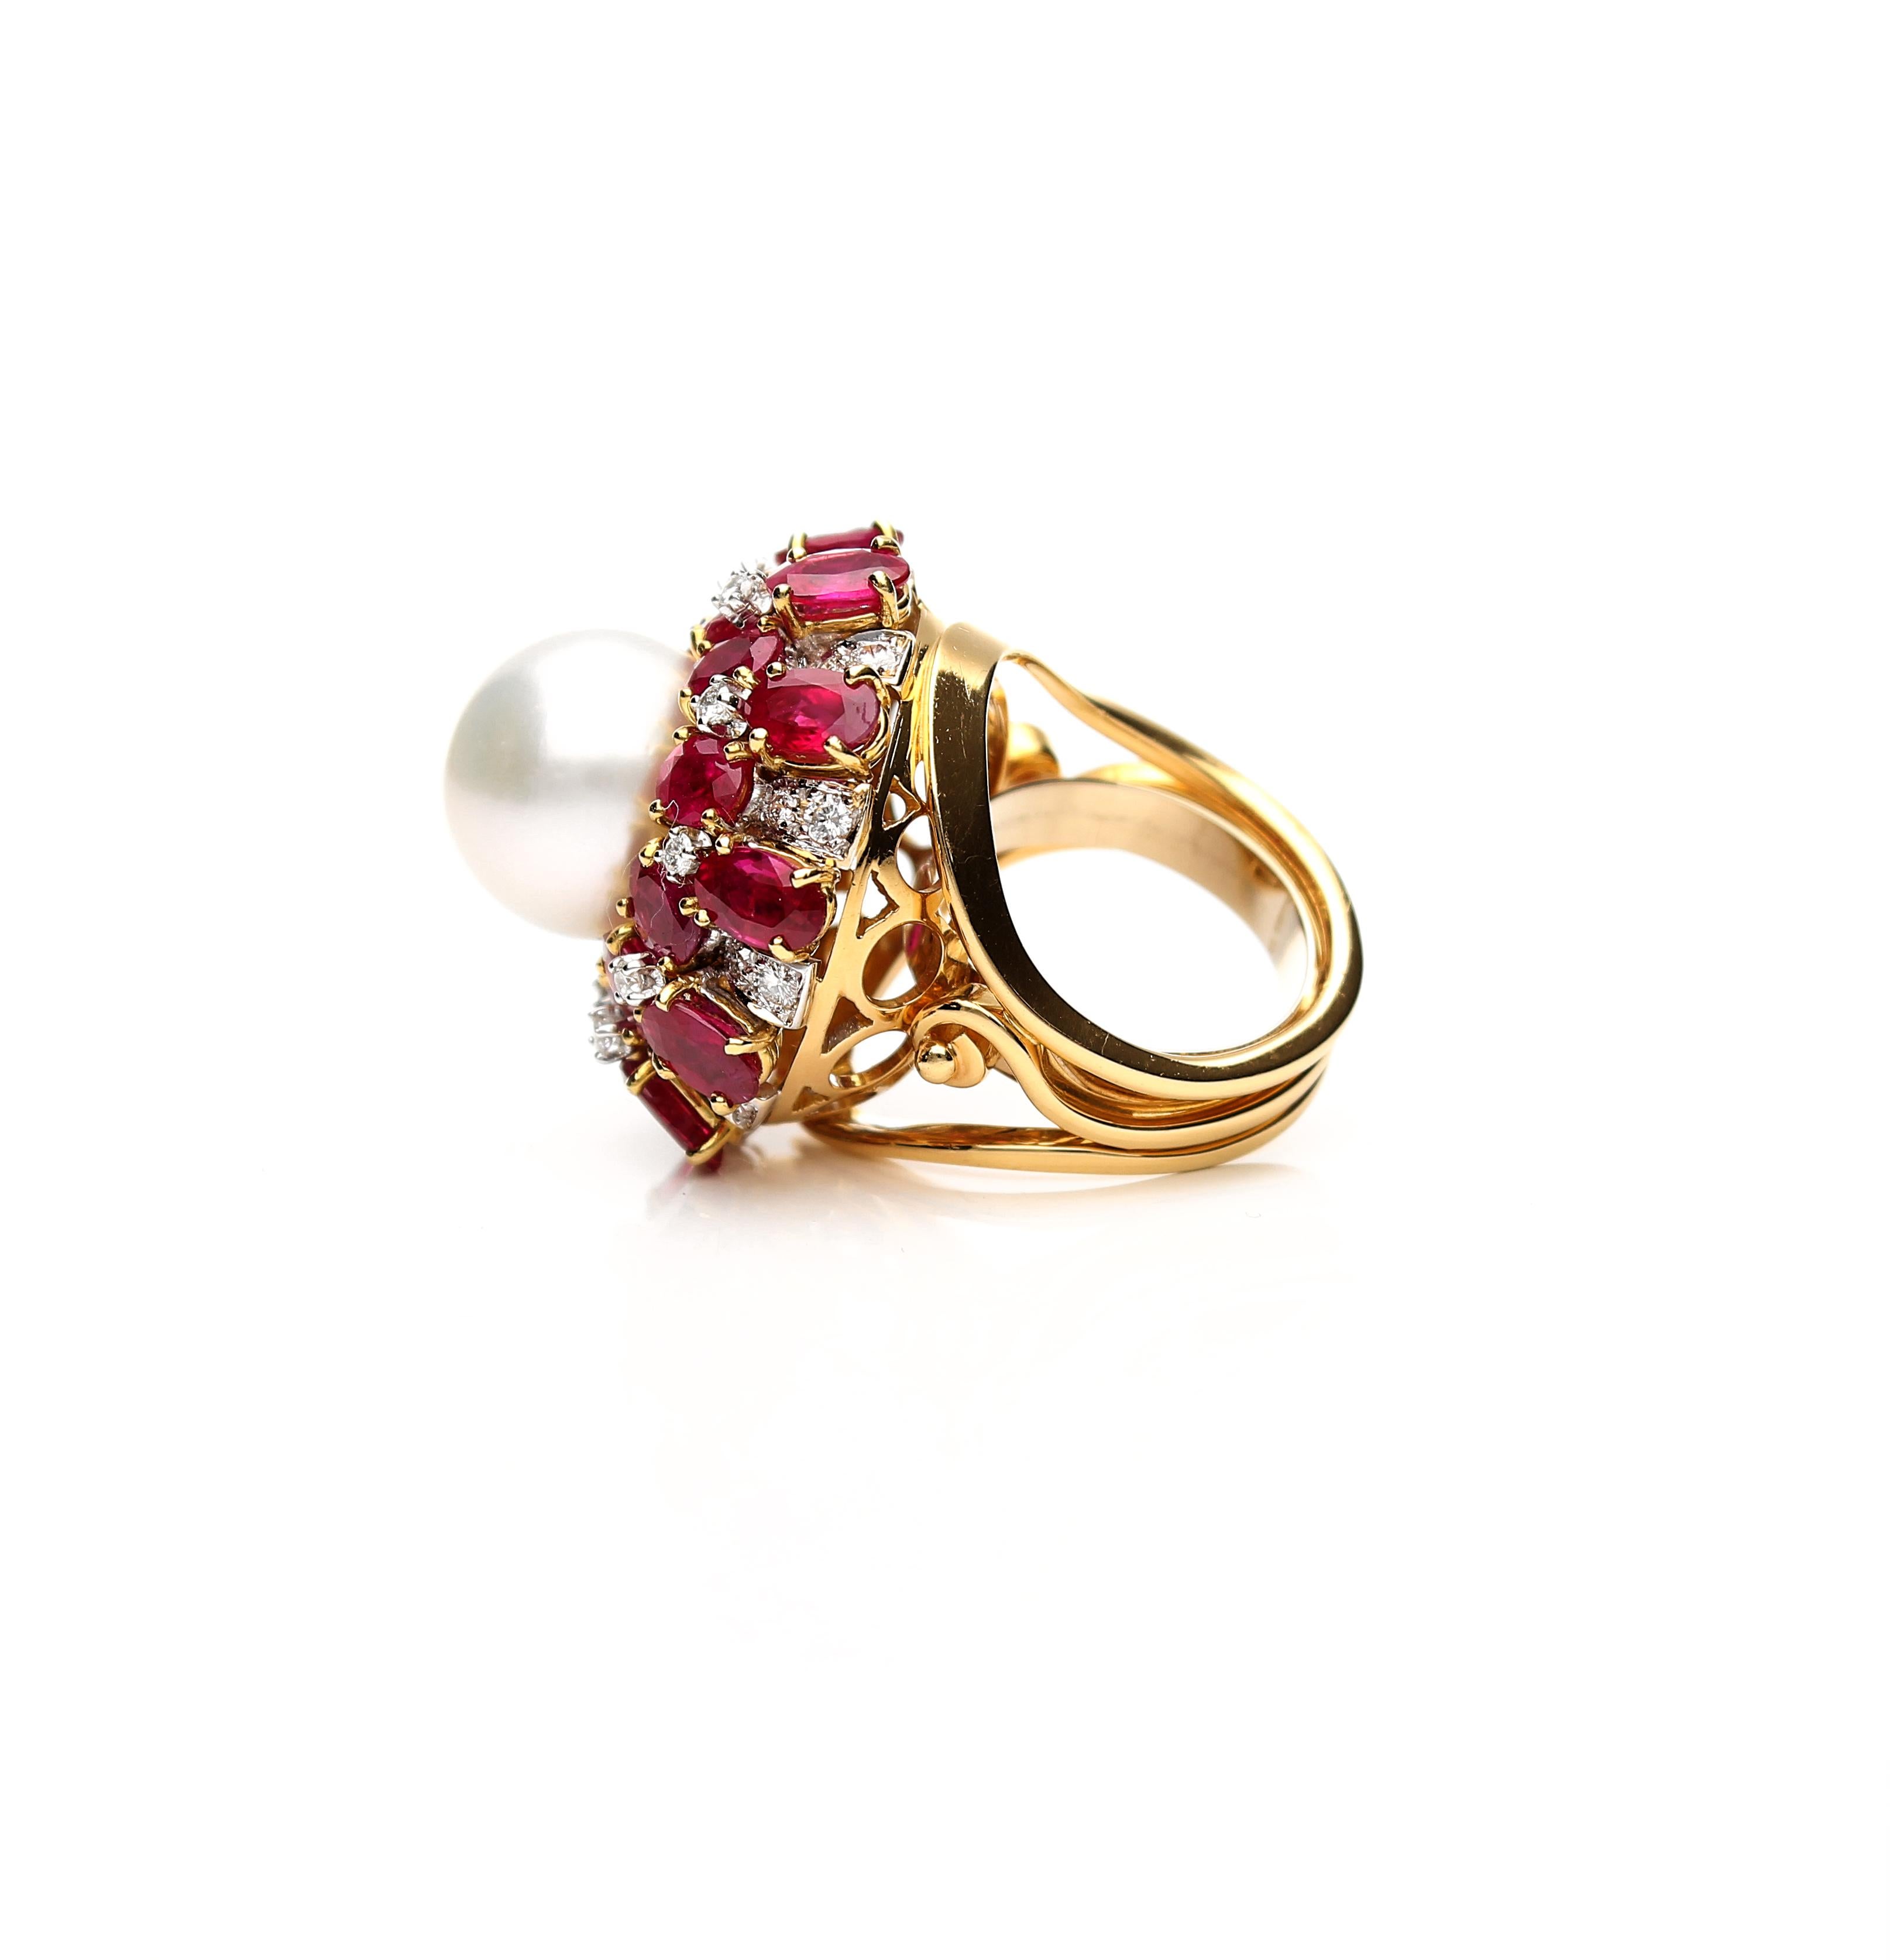 18 Karat Gold Ring with Oval Cut Rubies, Diamonds and South Sea Pearl 5